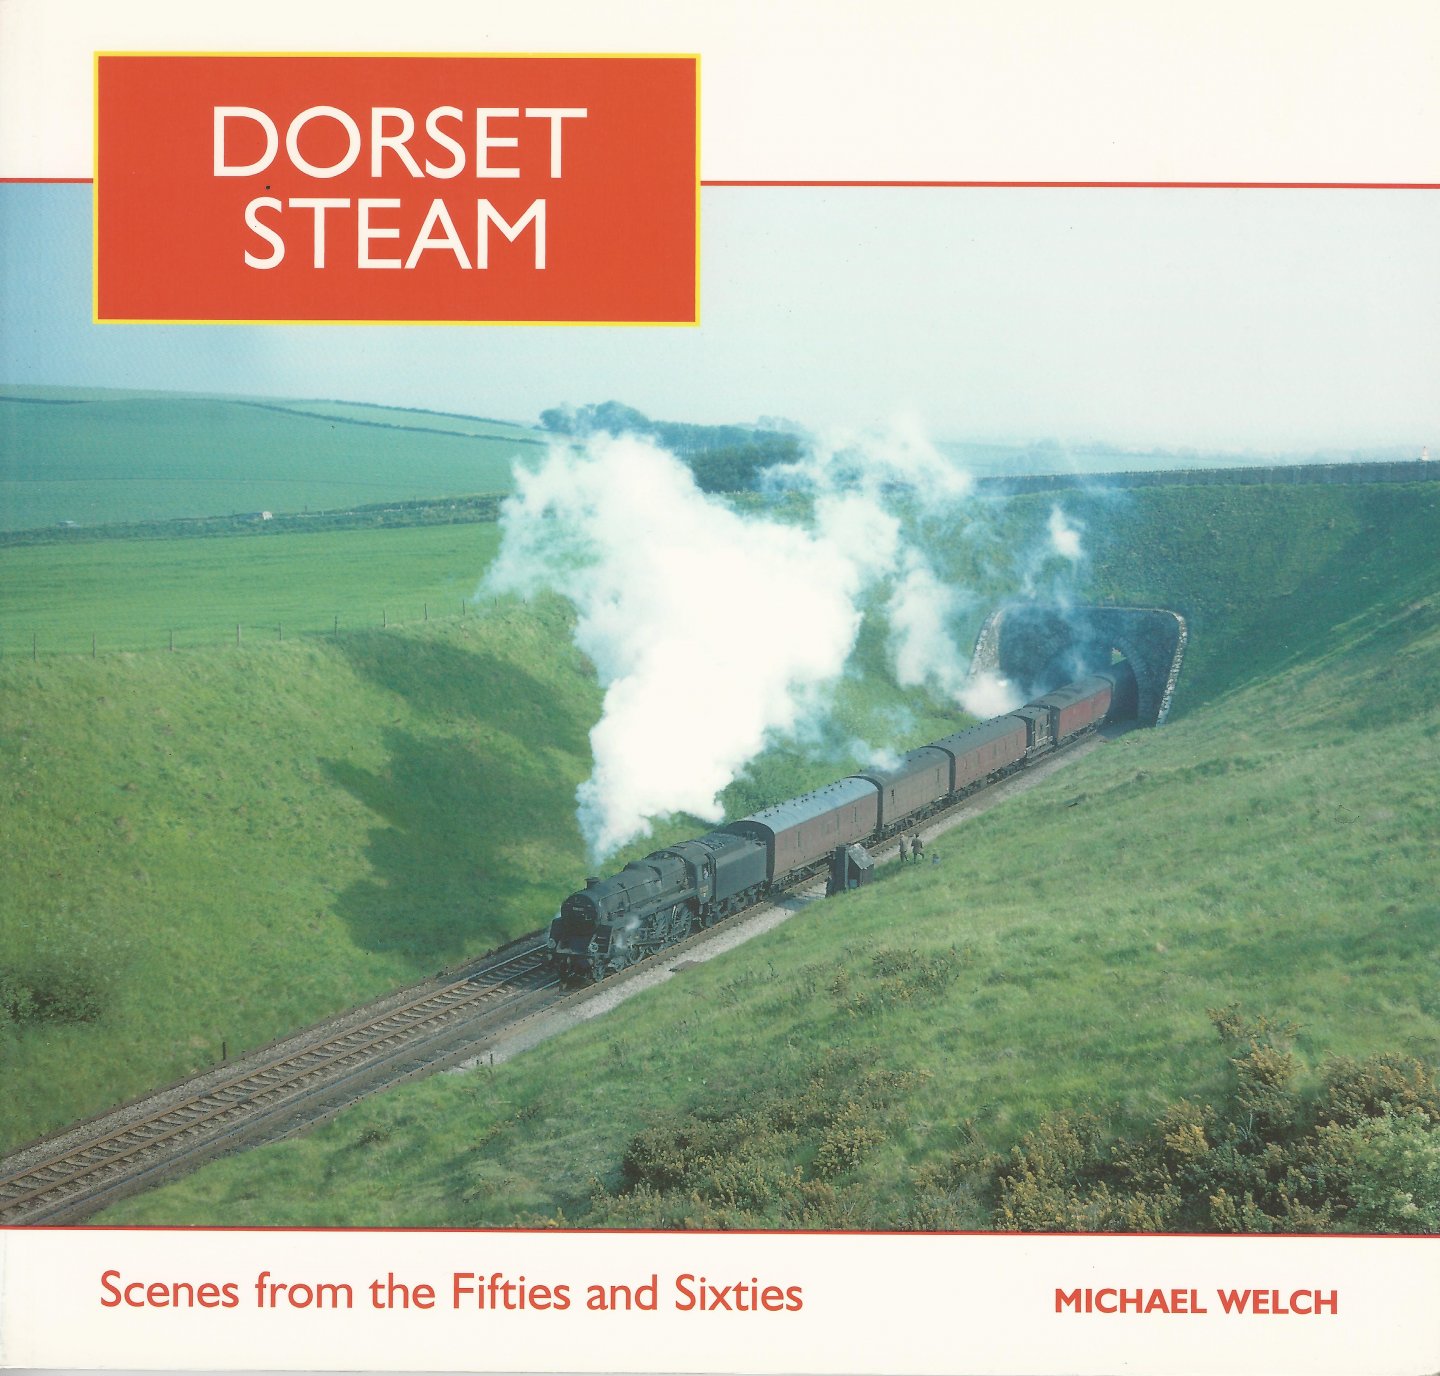 Welch, Michael - Dorset Steam, Scenes from the Fifties and Sixties